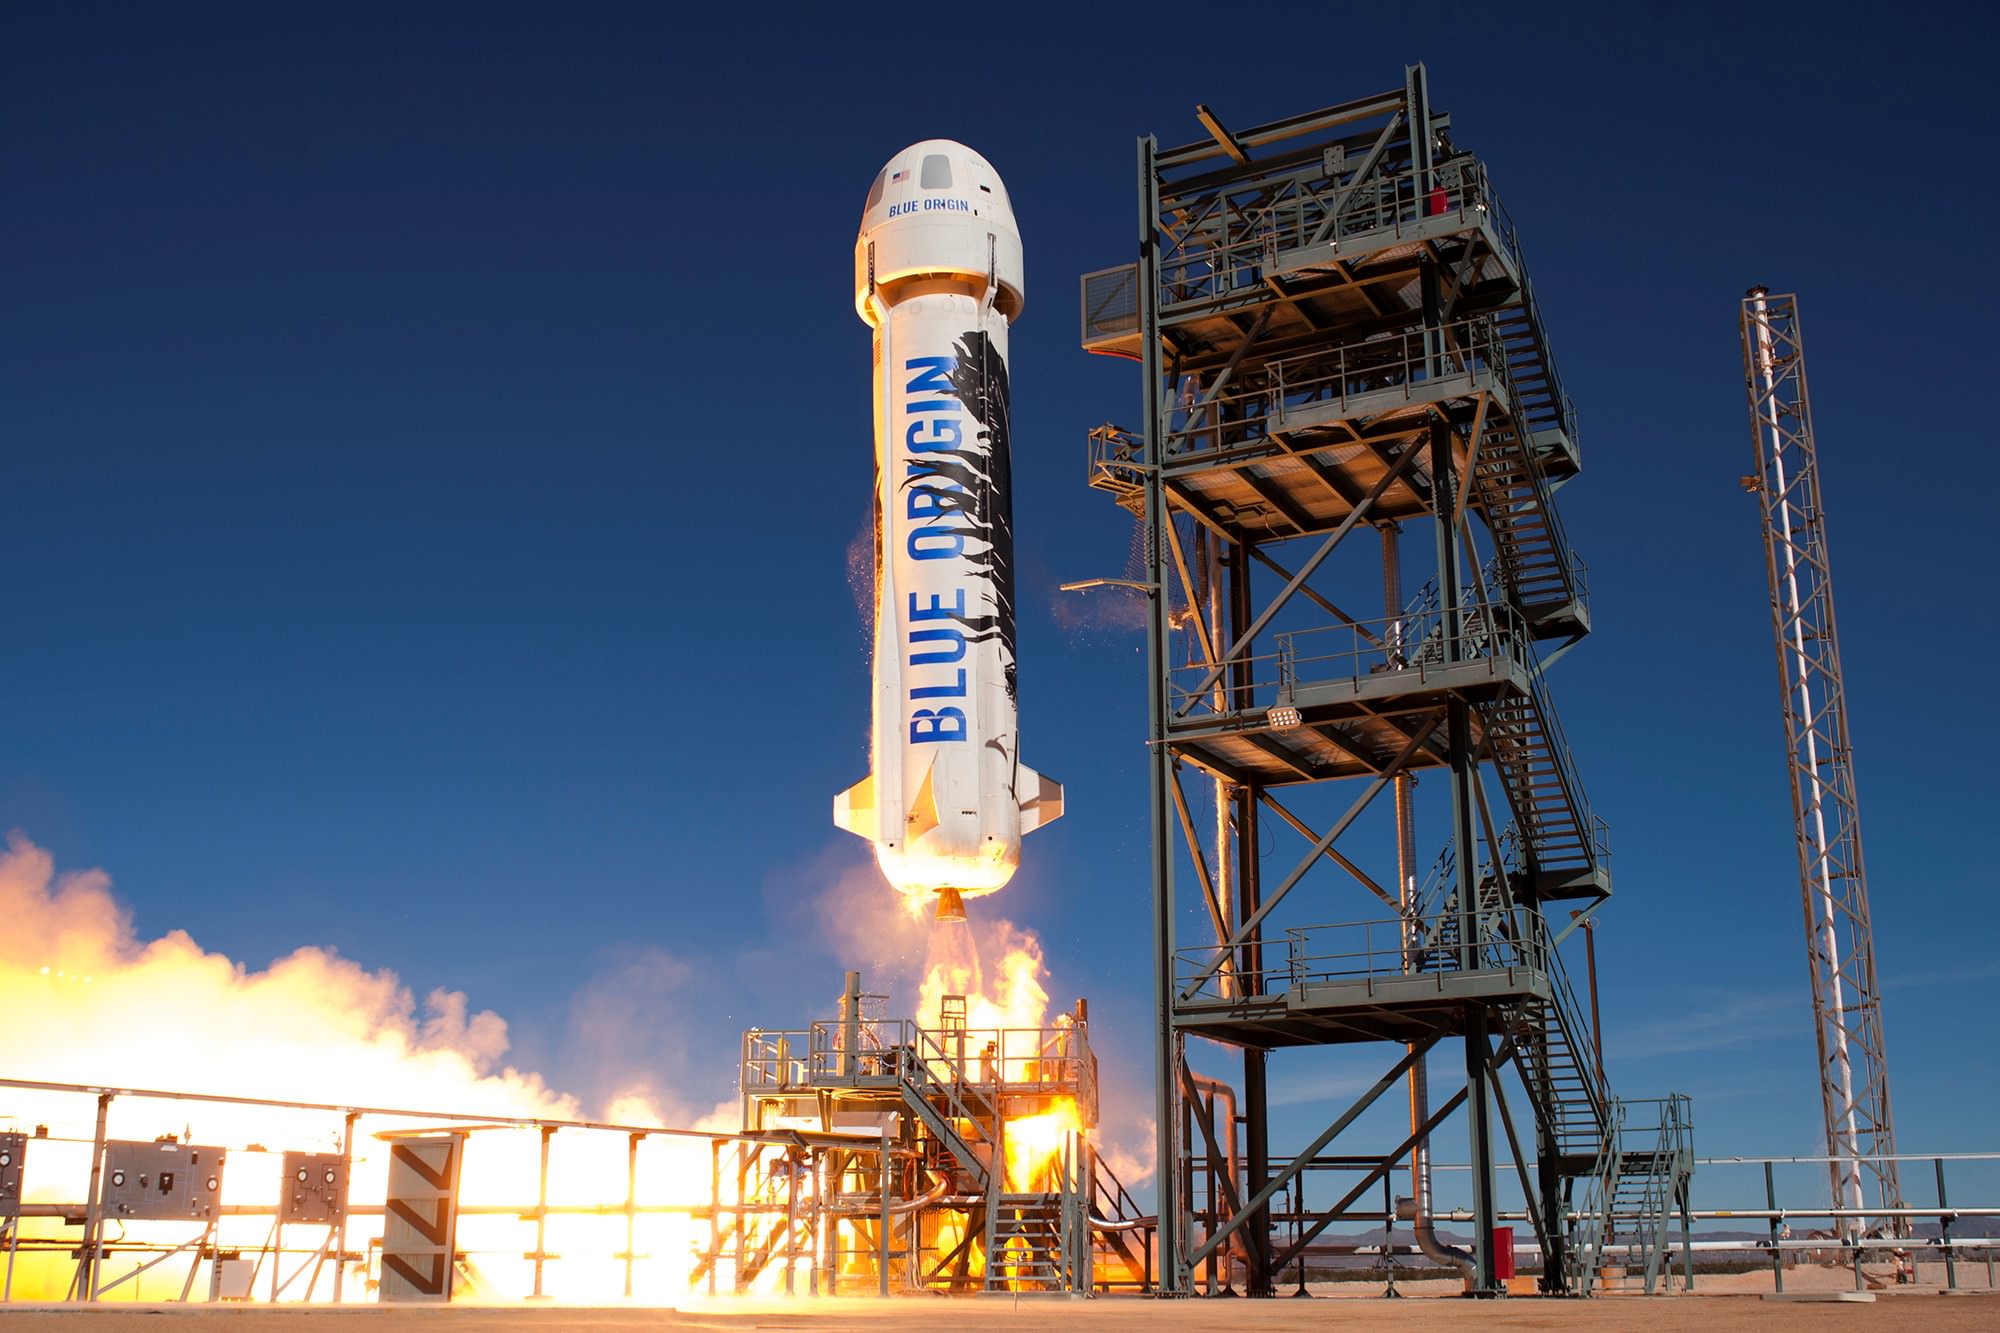 Blue Origin's New Shepard rocket has successfully launched and landed a second time. Image: Blue Origin